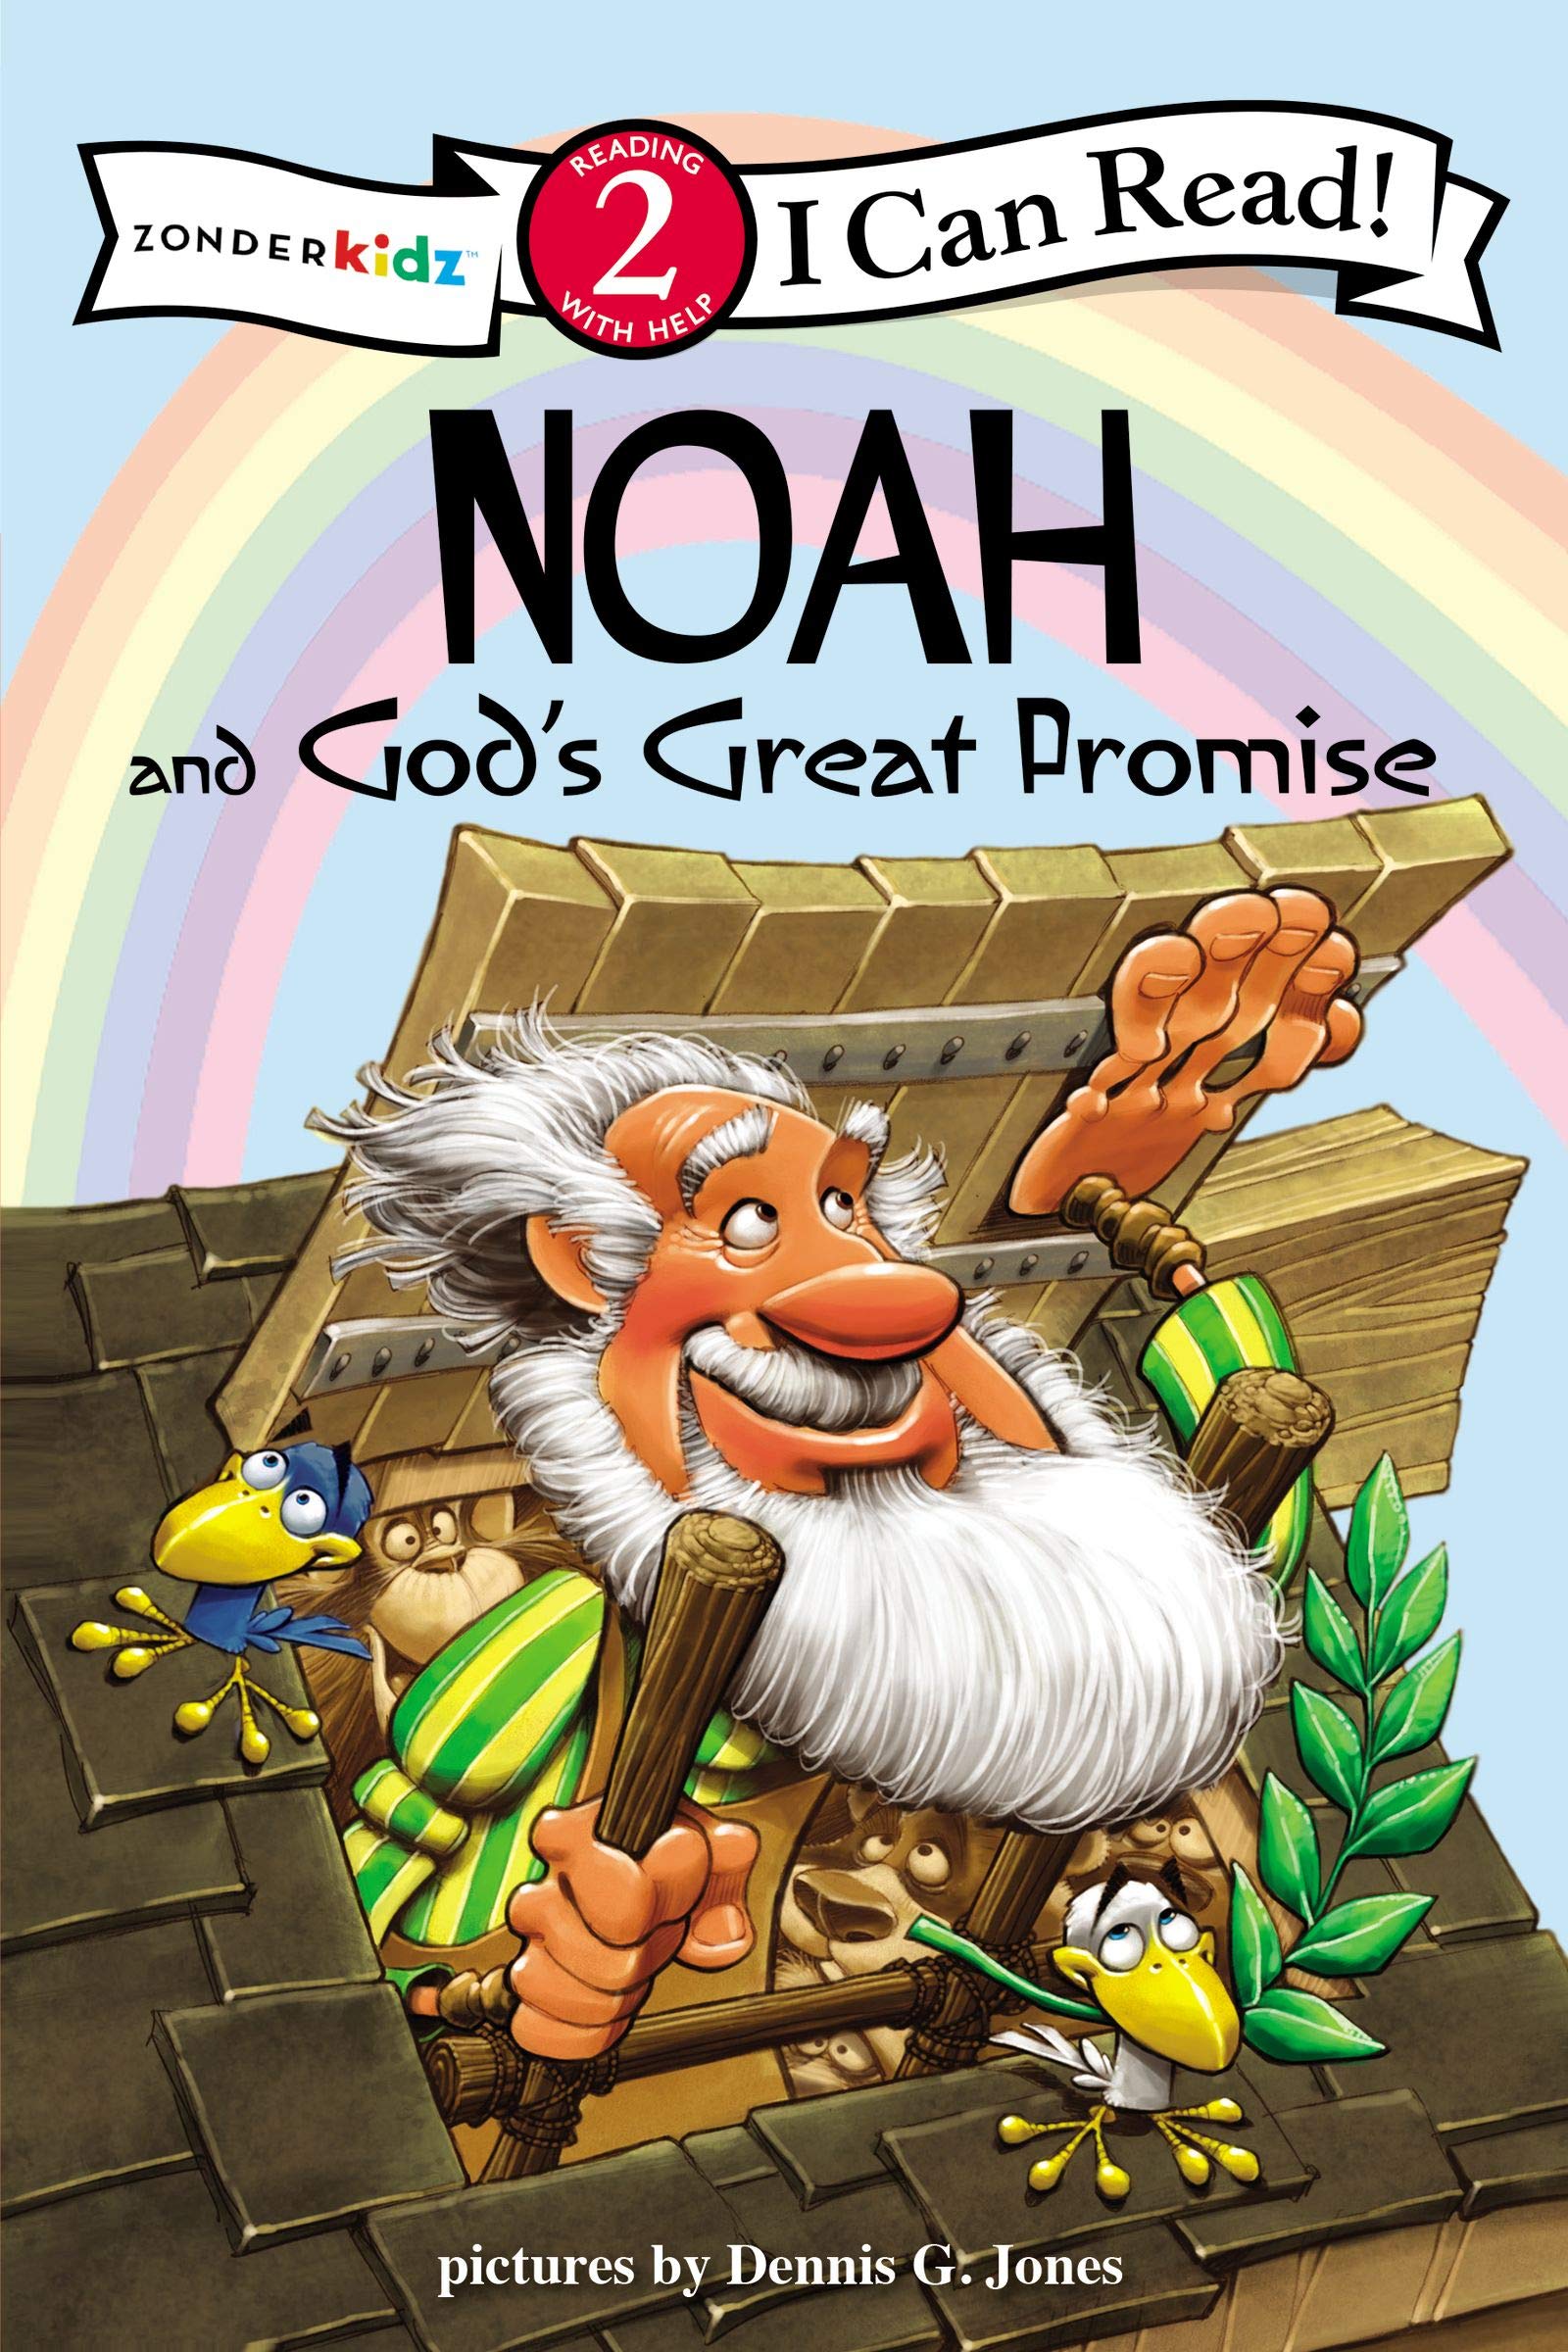 Noah and God’s Great Promise: Biblical Values, Level 2 (I Can Read!